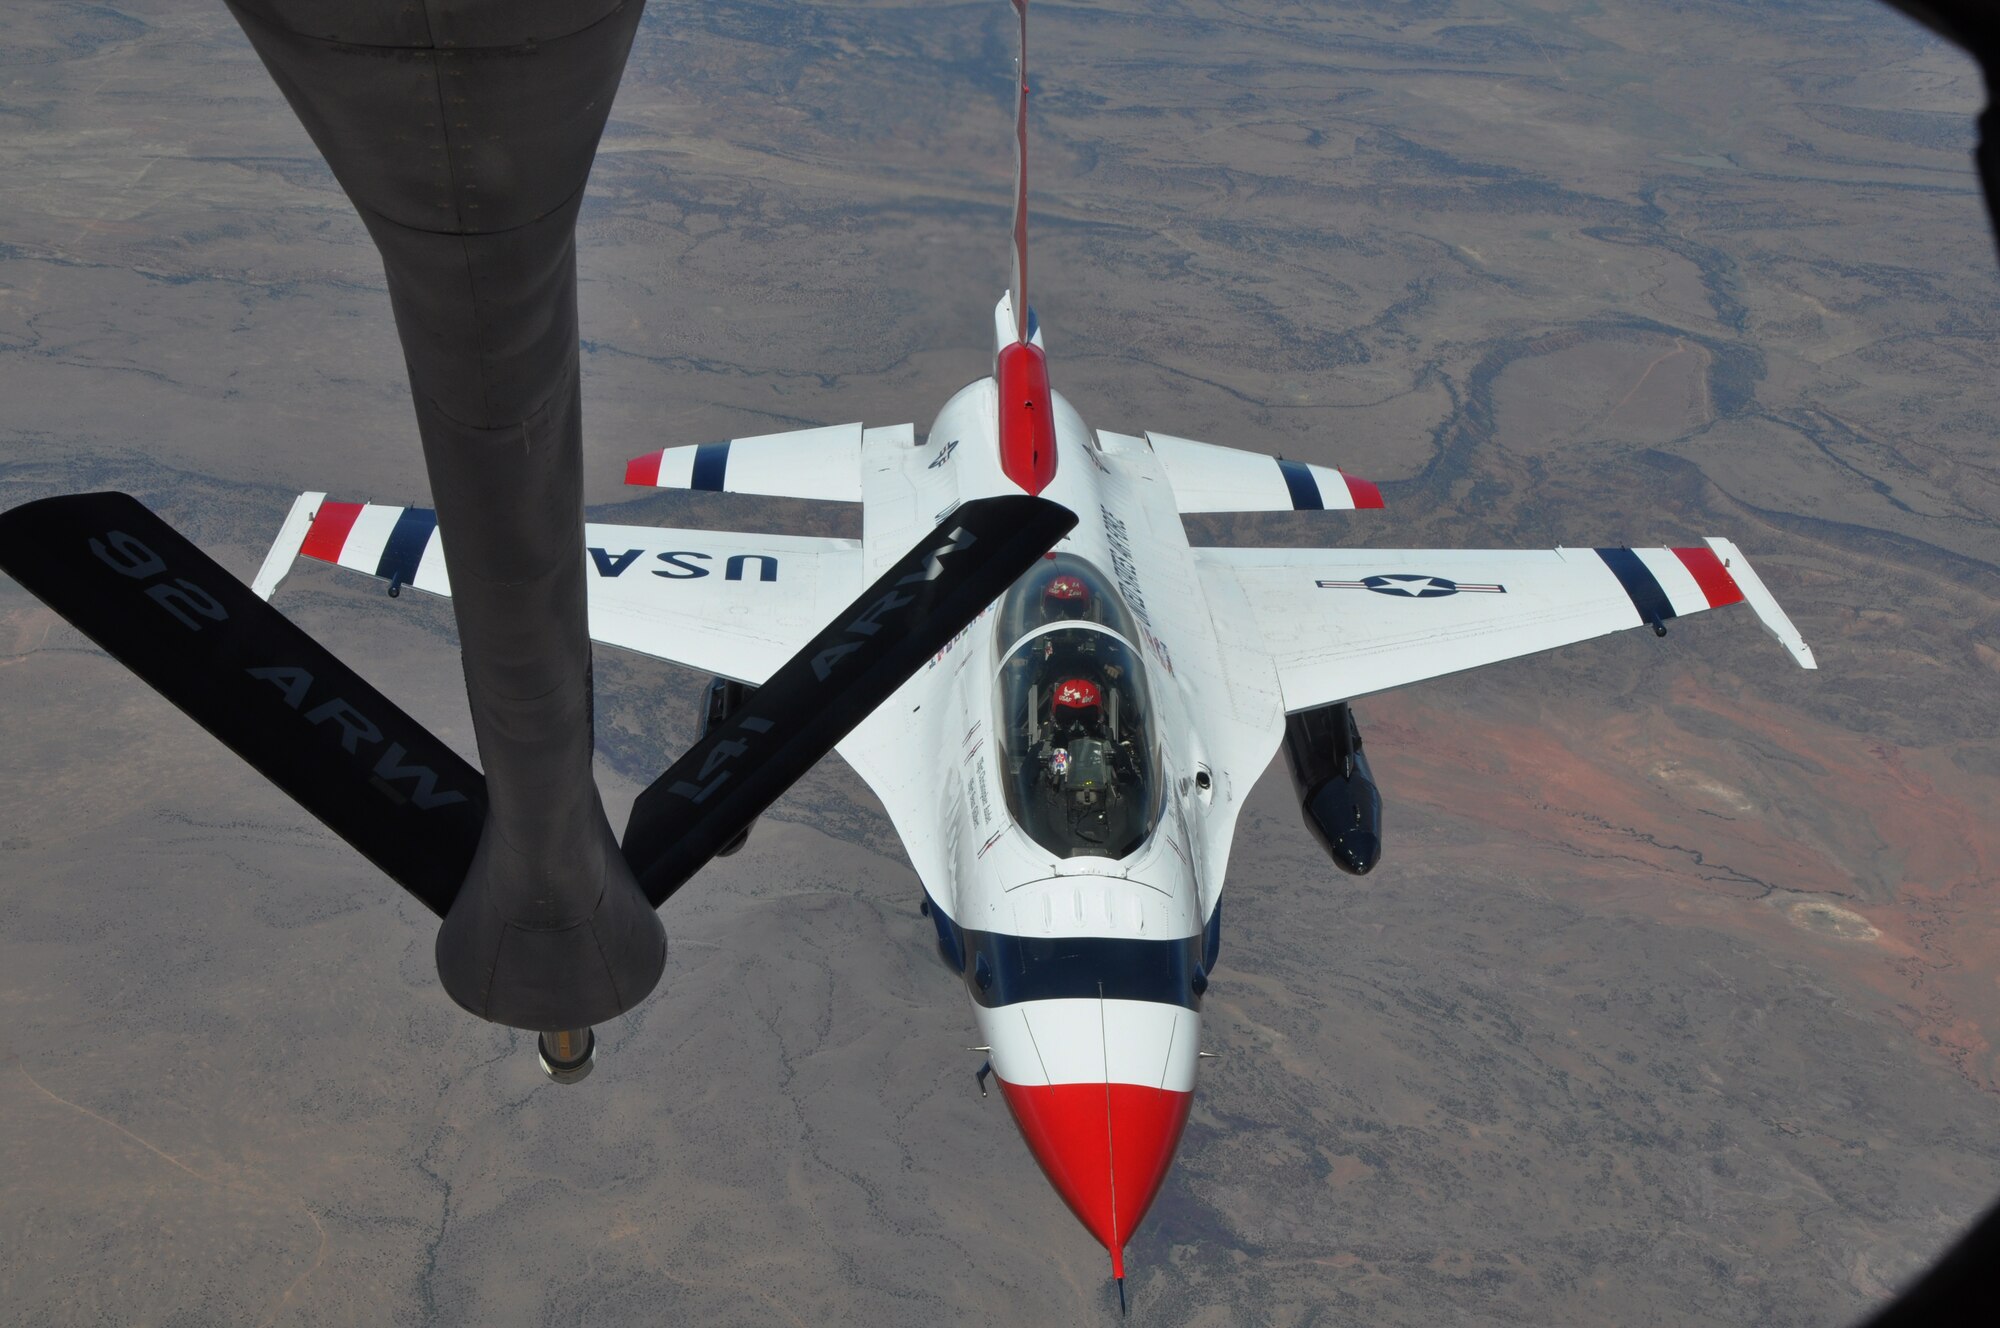 An F-16 Fighting Falcon aircraft piloted by Maj. Tyler Ellison, the operations officer for the U.S. Air Force Thunderbirds Air Demonstration Squadron, approaches the boom of a KC-135 Stratotanker assigned to McConnell Air Force Base, Kan., June 4, 2015. The KC-135 provided cross-country air refueling support for the Thunderbirds. The KC-135 aircrew, all Air Force Reservists from the 931st Air Refueling Group, performed fourteen air refueling contacts during the mission. (U.S. Air Force photo by Tech. Sgt. Abigail Klein)